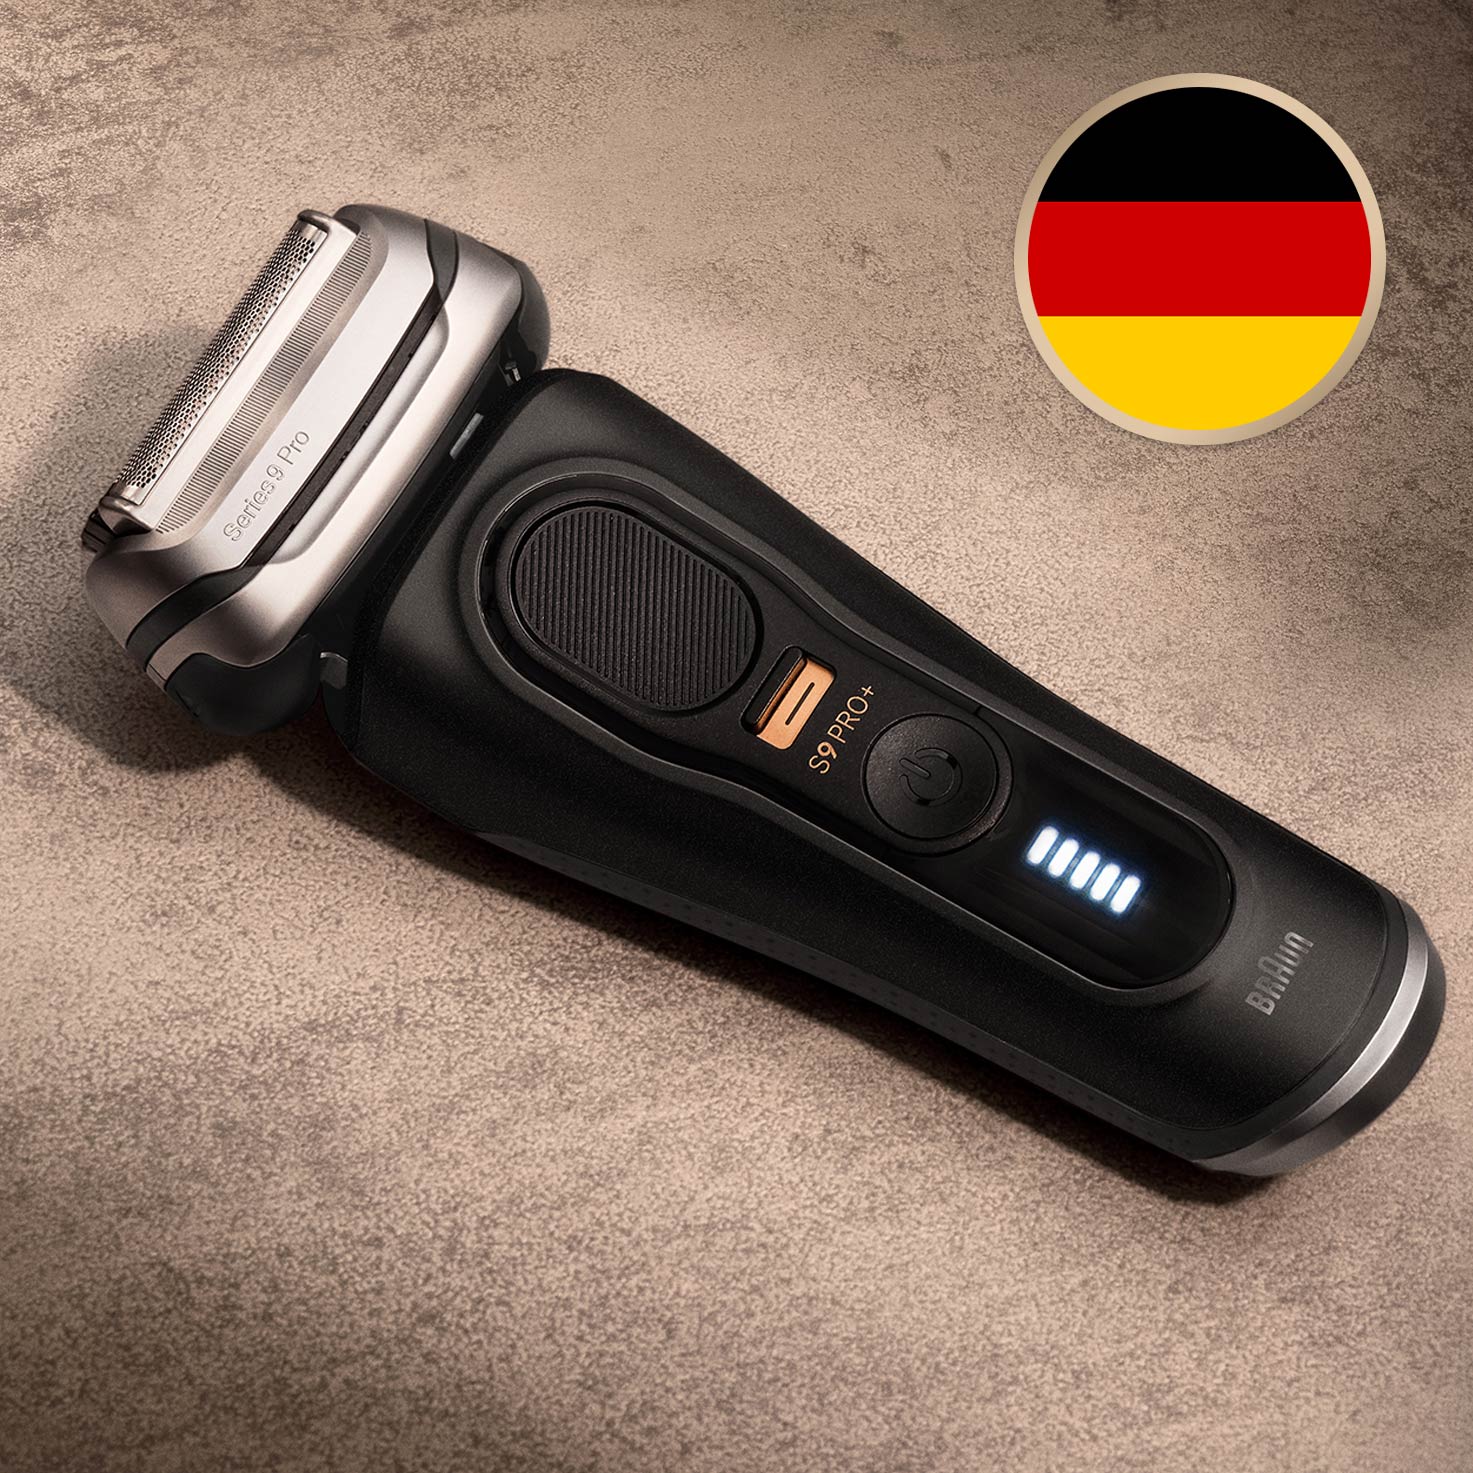 Series 9 Pro+ 9510s Wet & Dry shaver with charging stand and